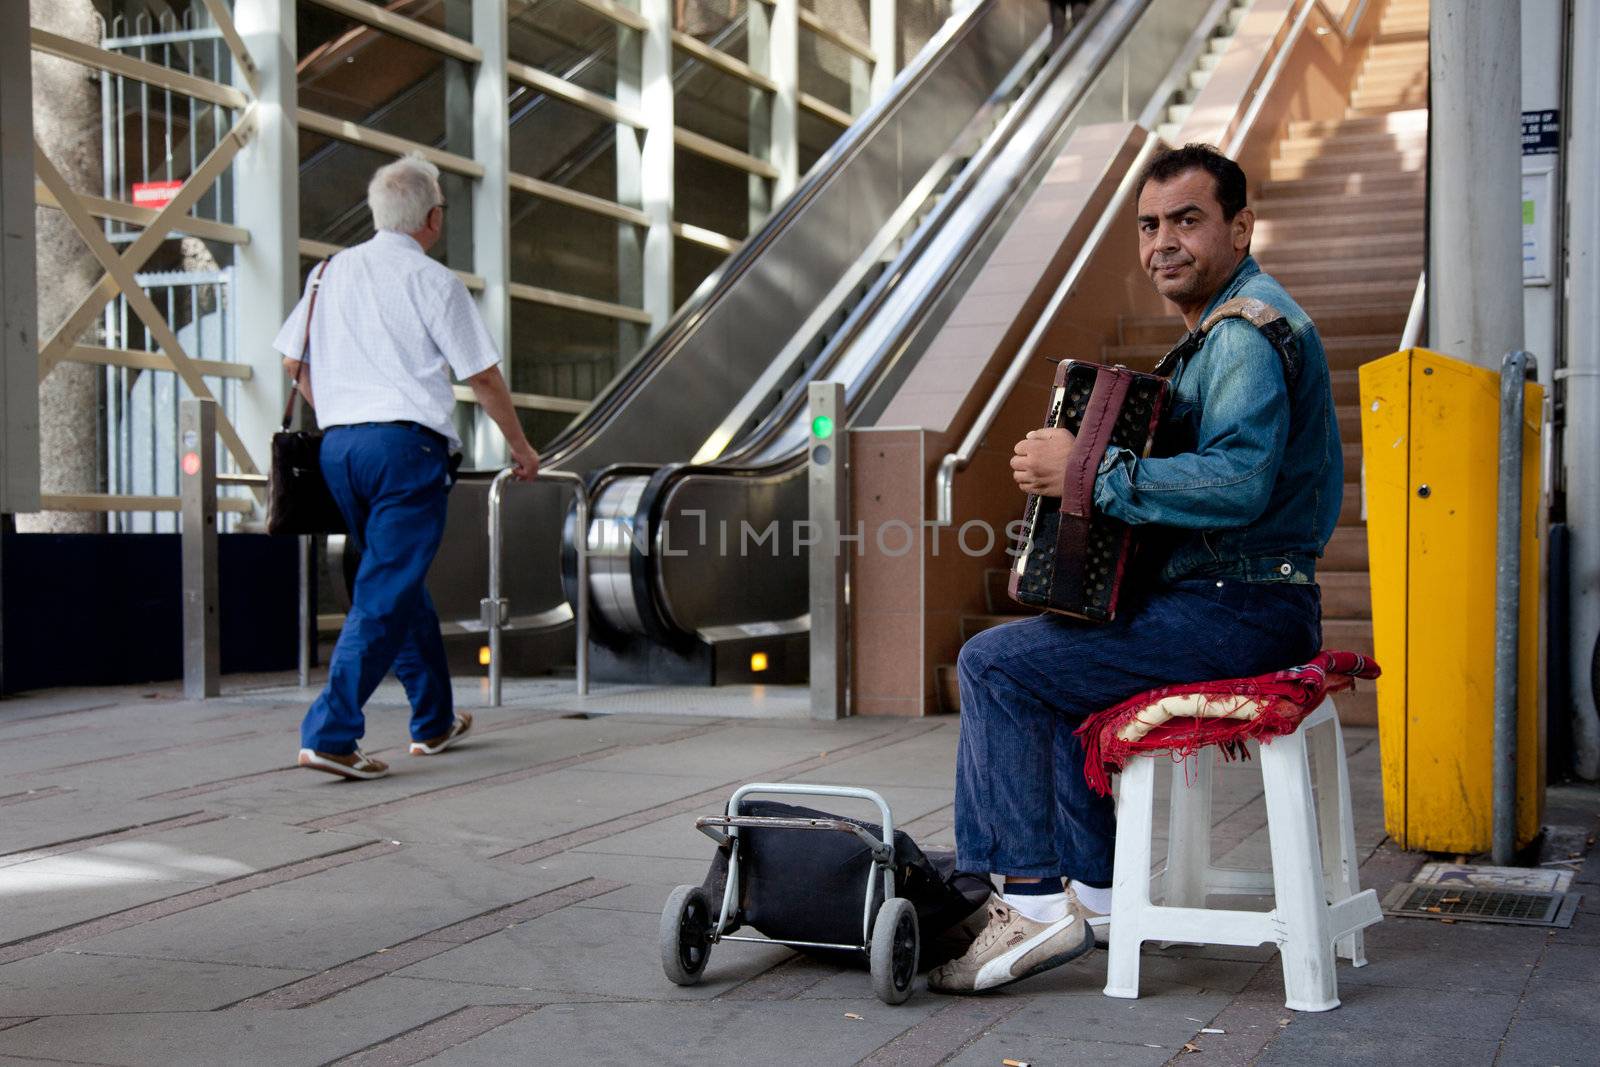 street musician playing accordion near stairs to shopping centre